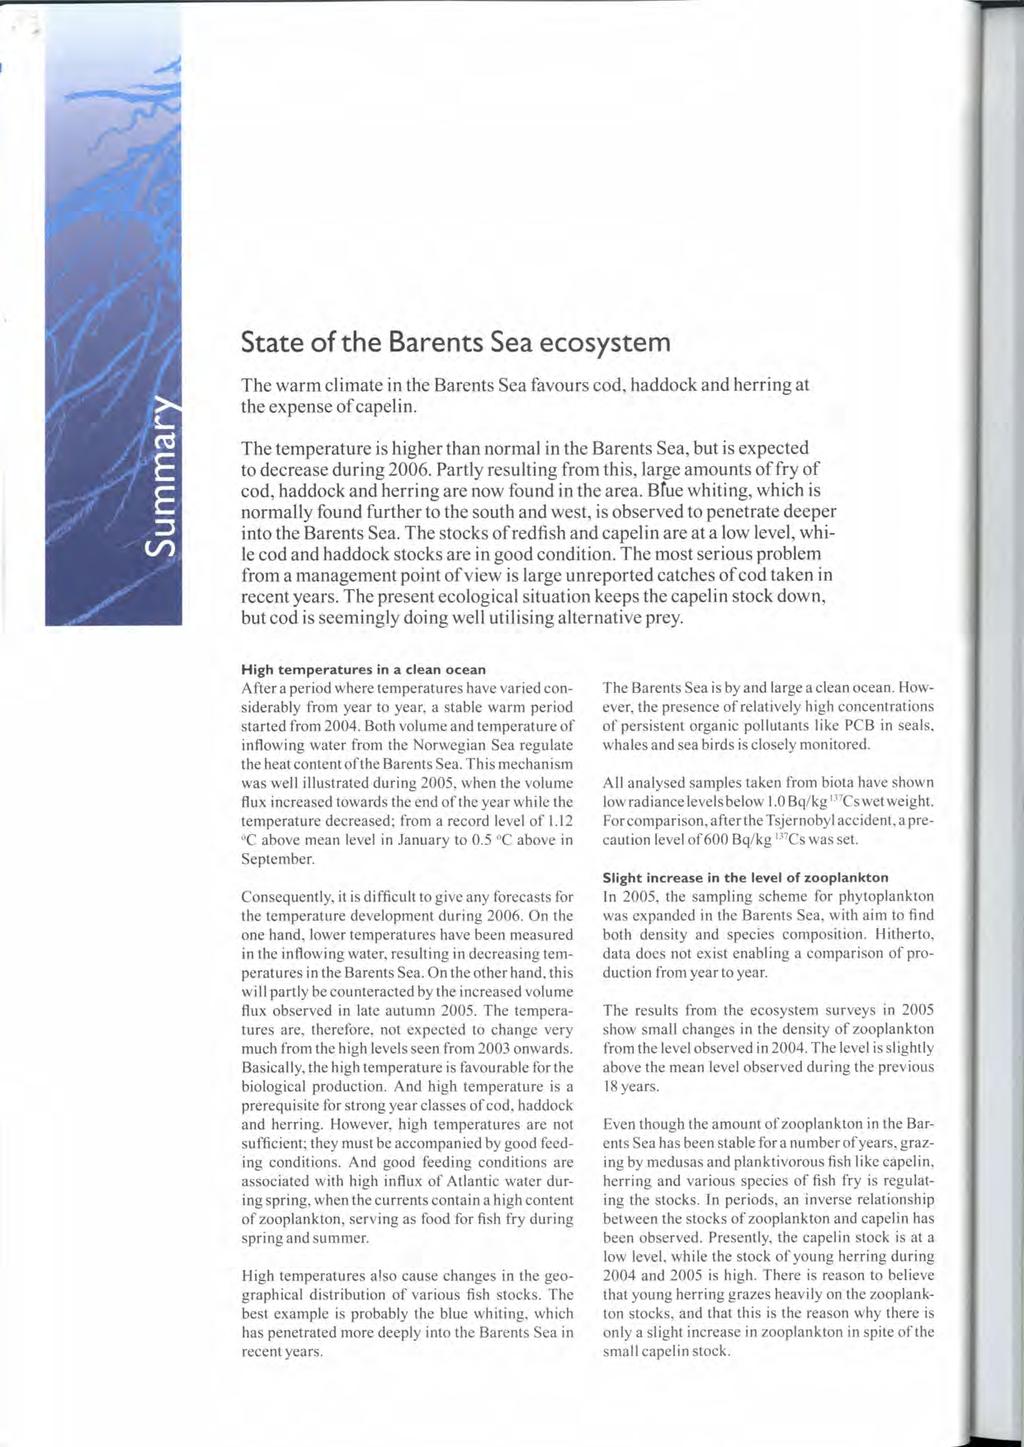 State of the Barents Sea ecosystem The warm climate in the Barents Sea favours cod, haddock and herring at the expense of capelin.